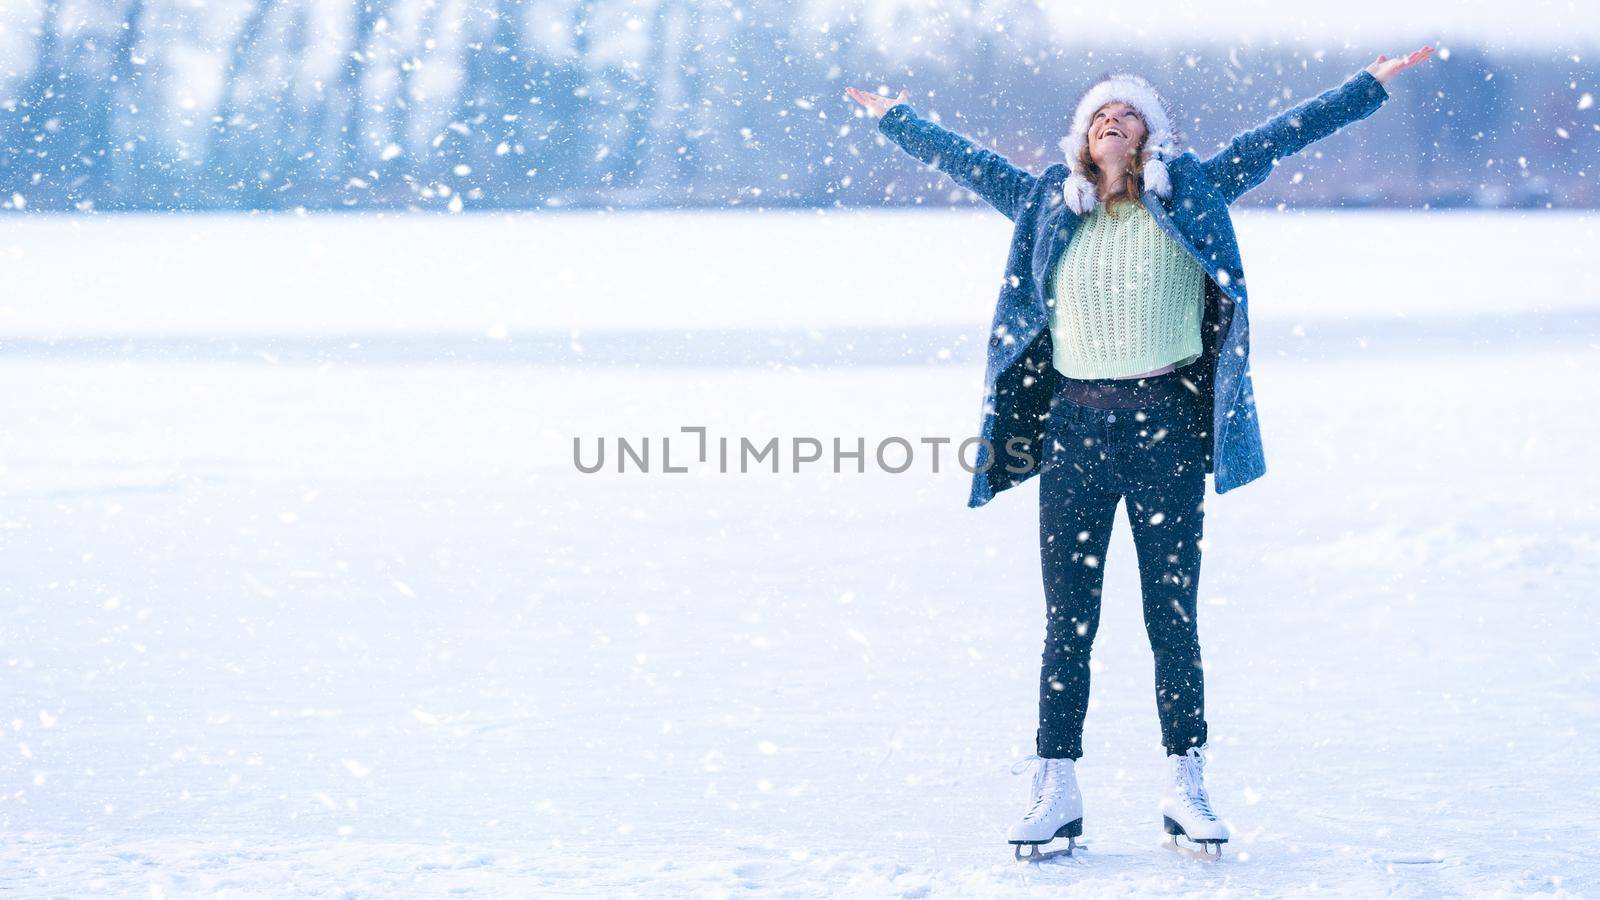 ice skating on a frozen pond in winter by Edophoto